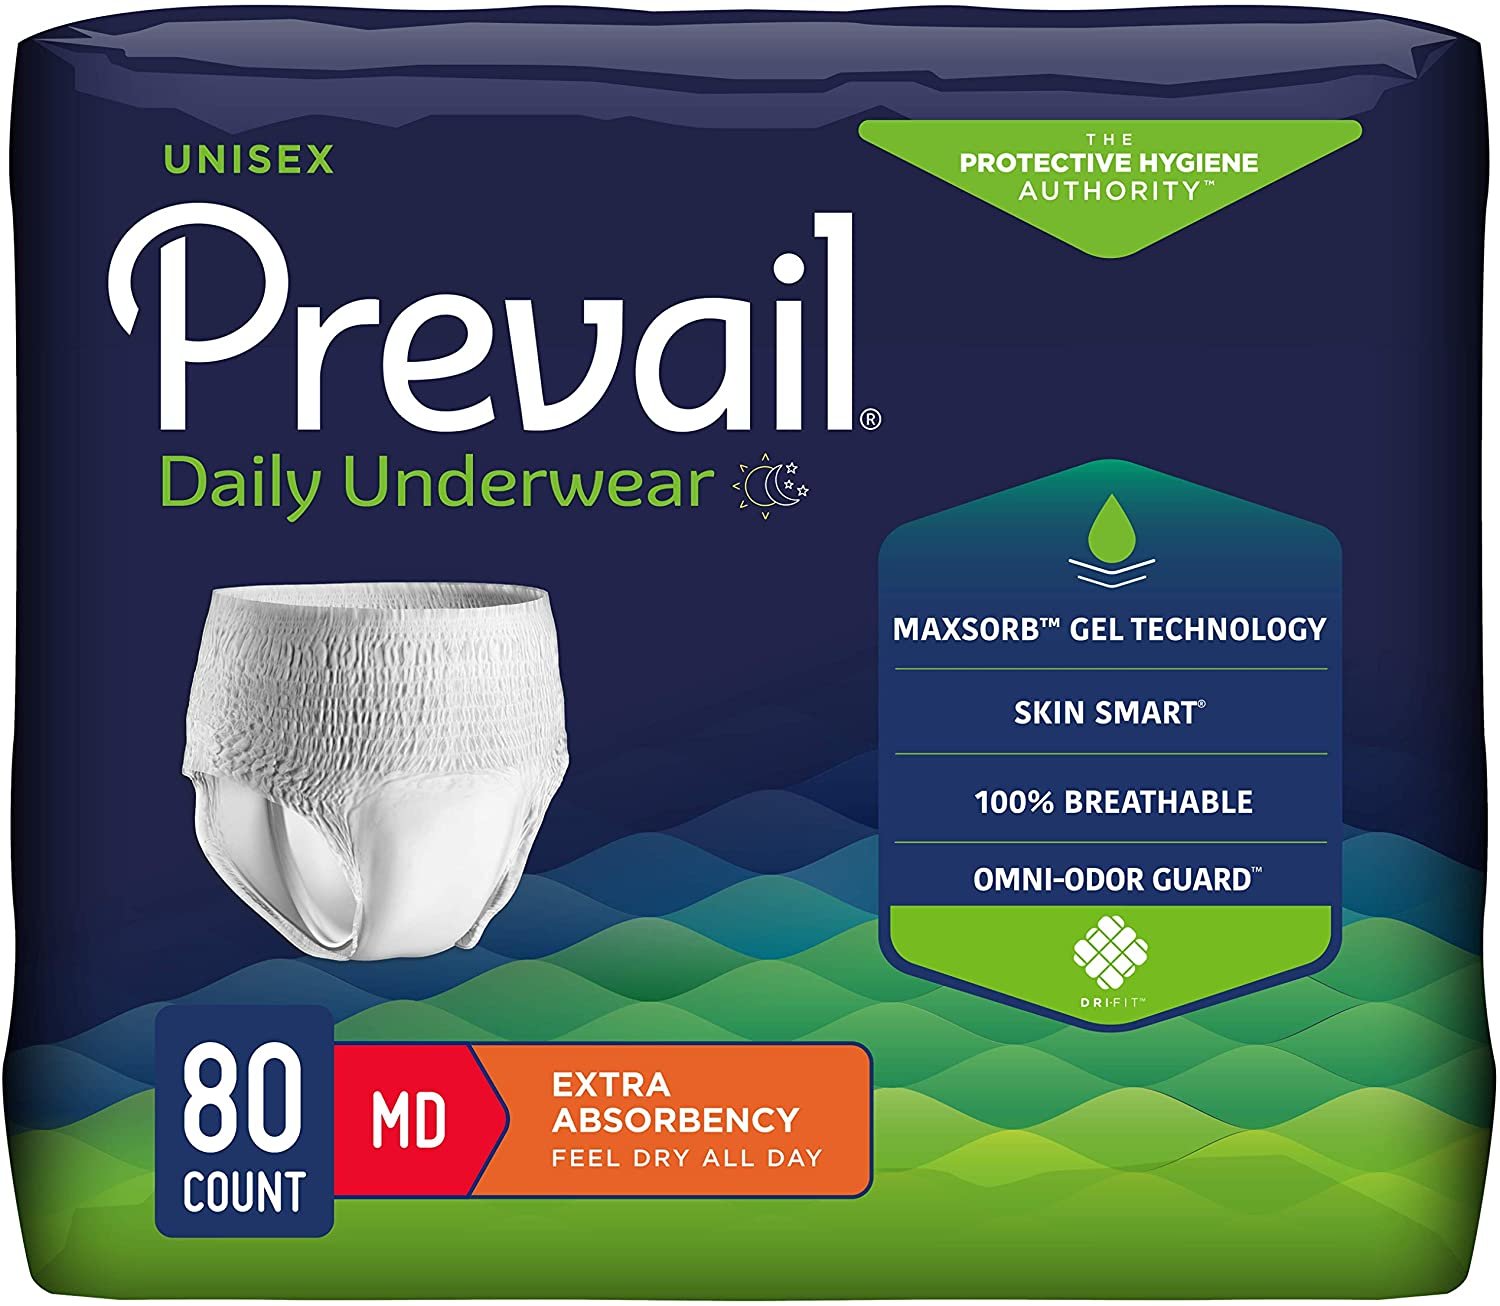 Package of Prevail Diapers